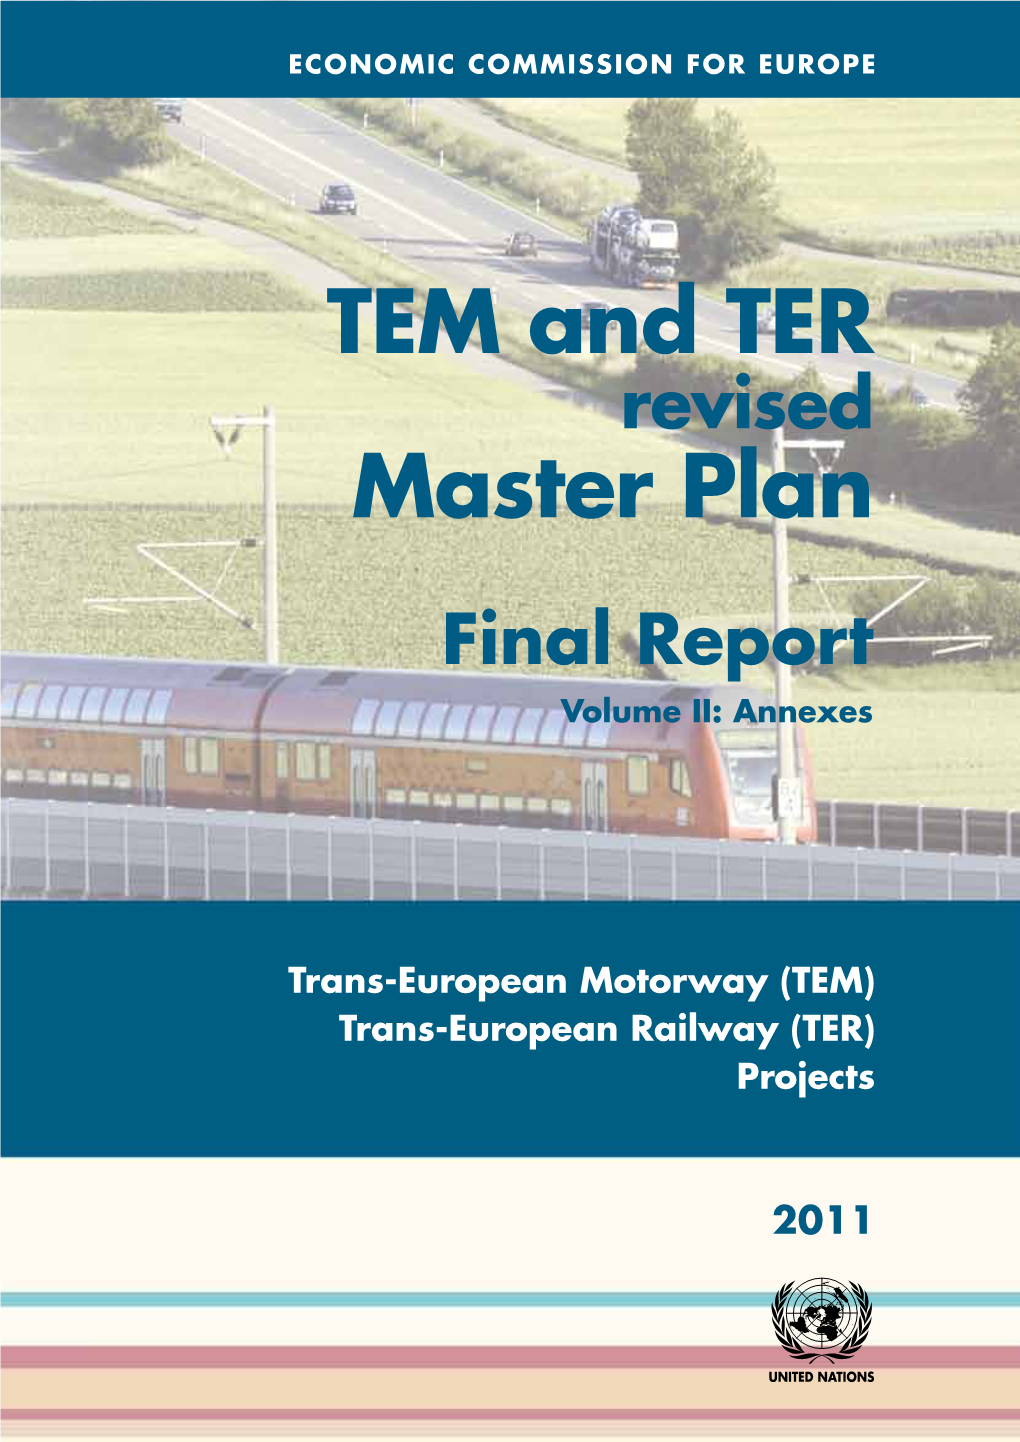 TEM and TER Master Plan Backbone Networks Identified in 2005